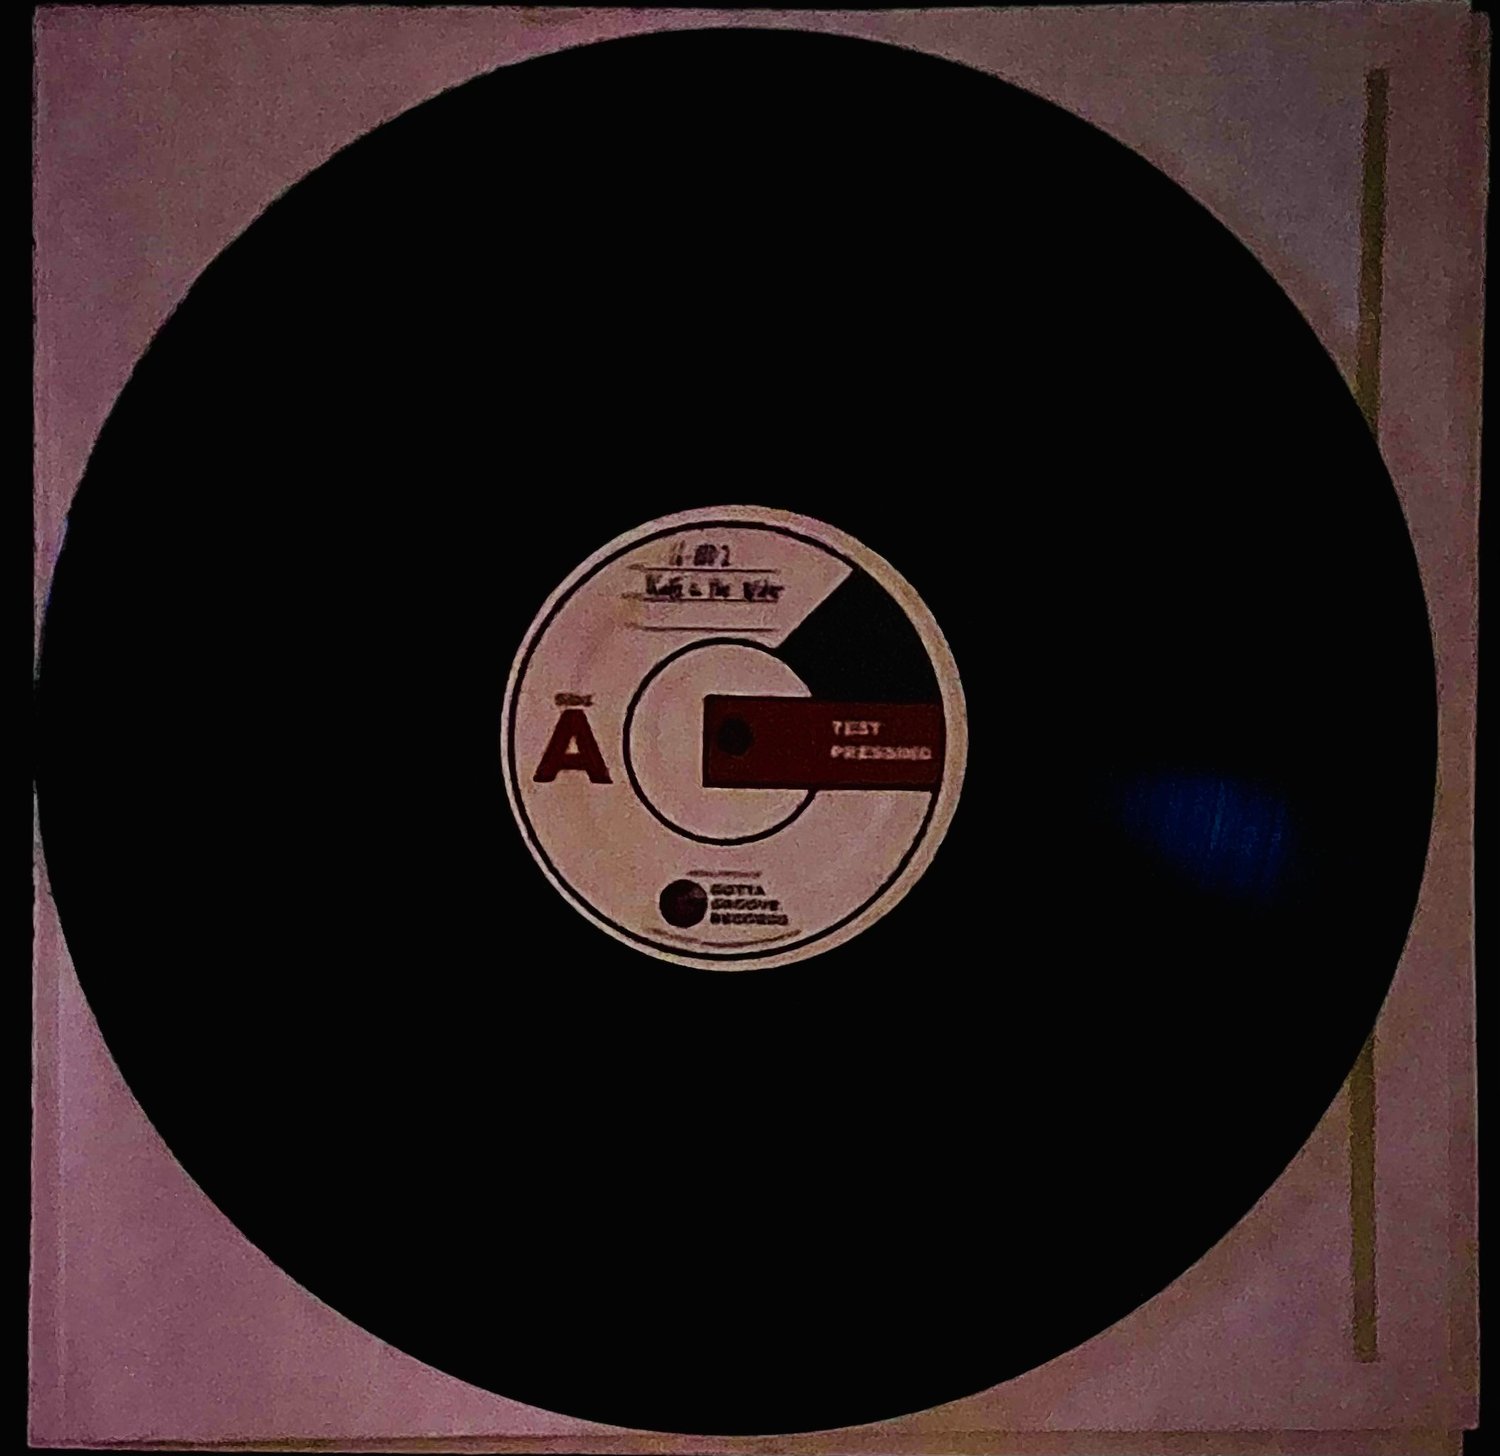 Image of Knife In the Water Test Pressing “ Plays One Sound and Others” LP